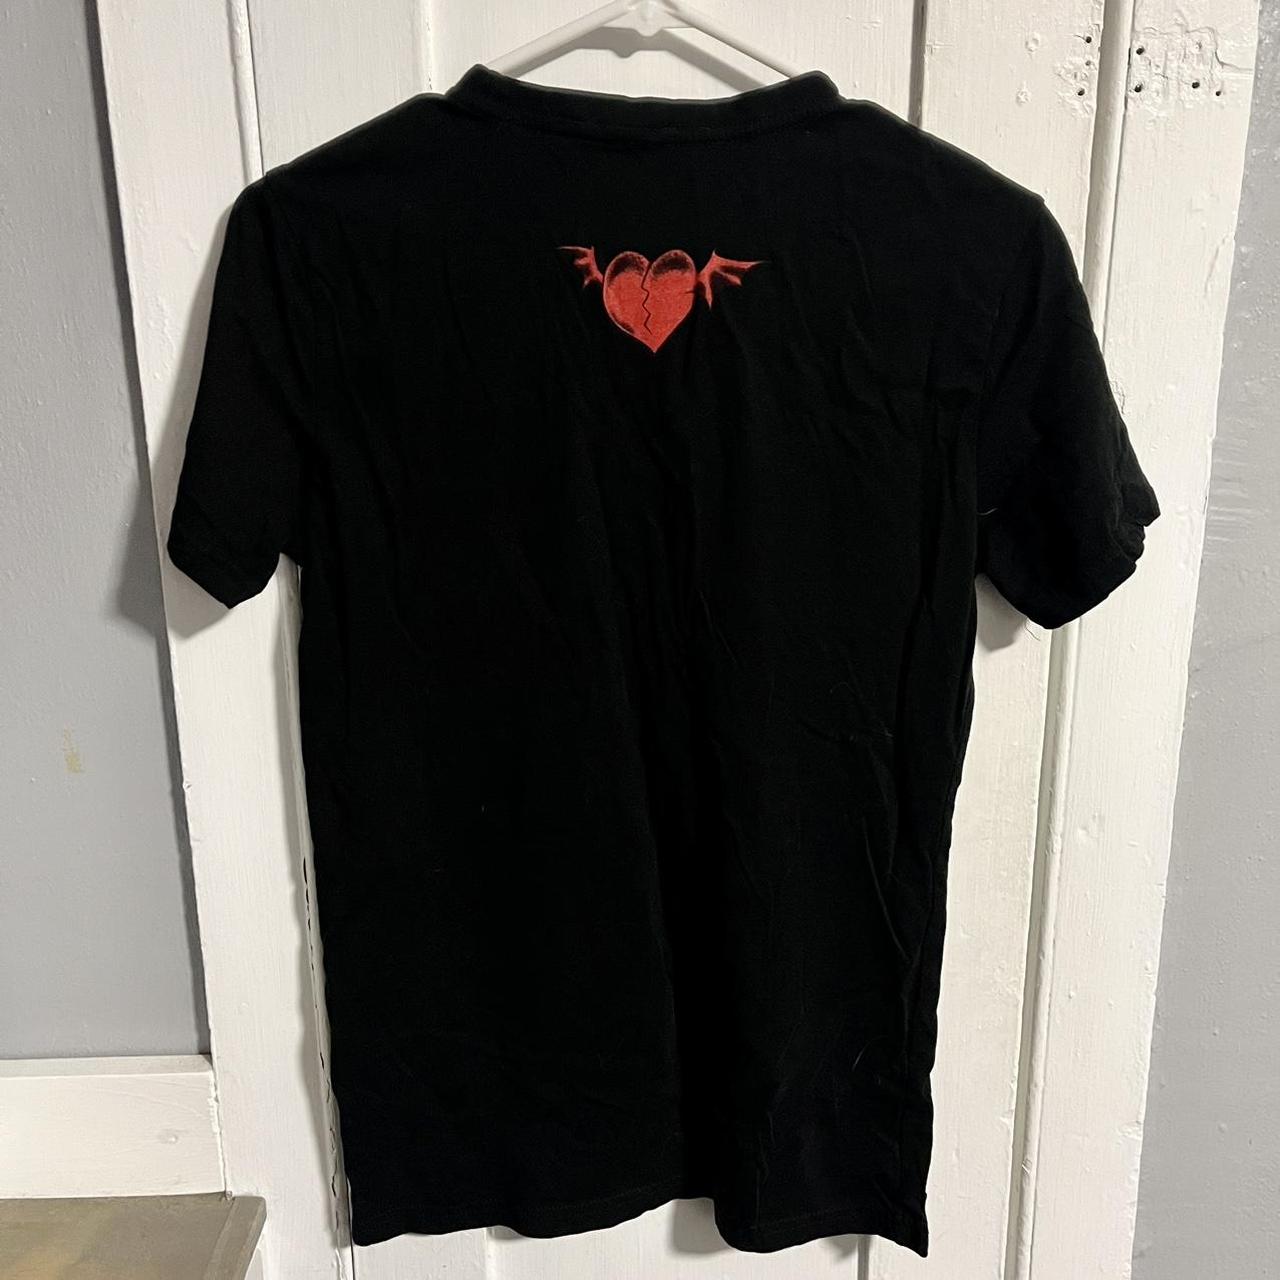 Yungblud hot topic shirt Size S $8 +... - Depop